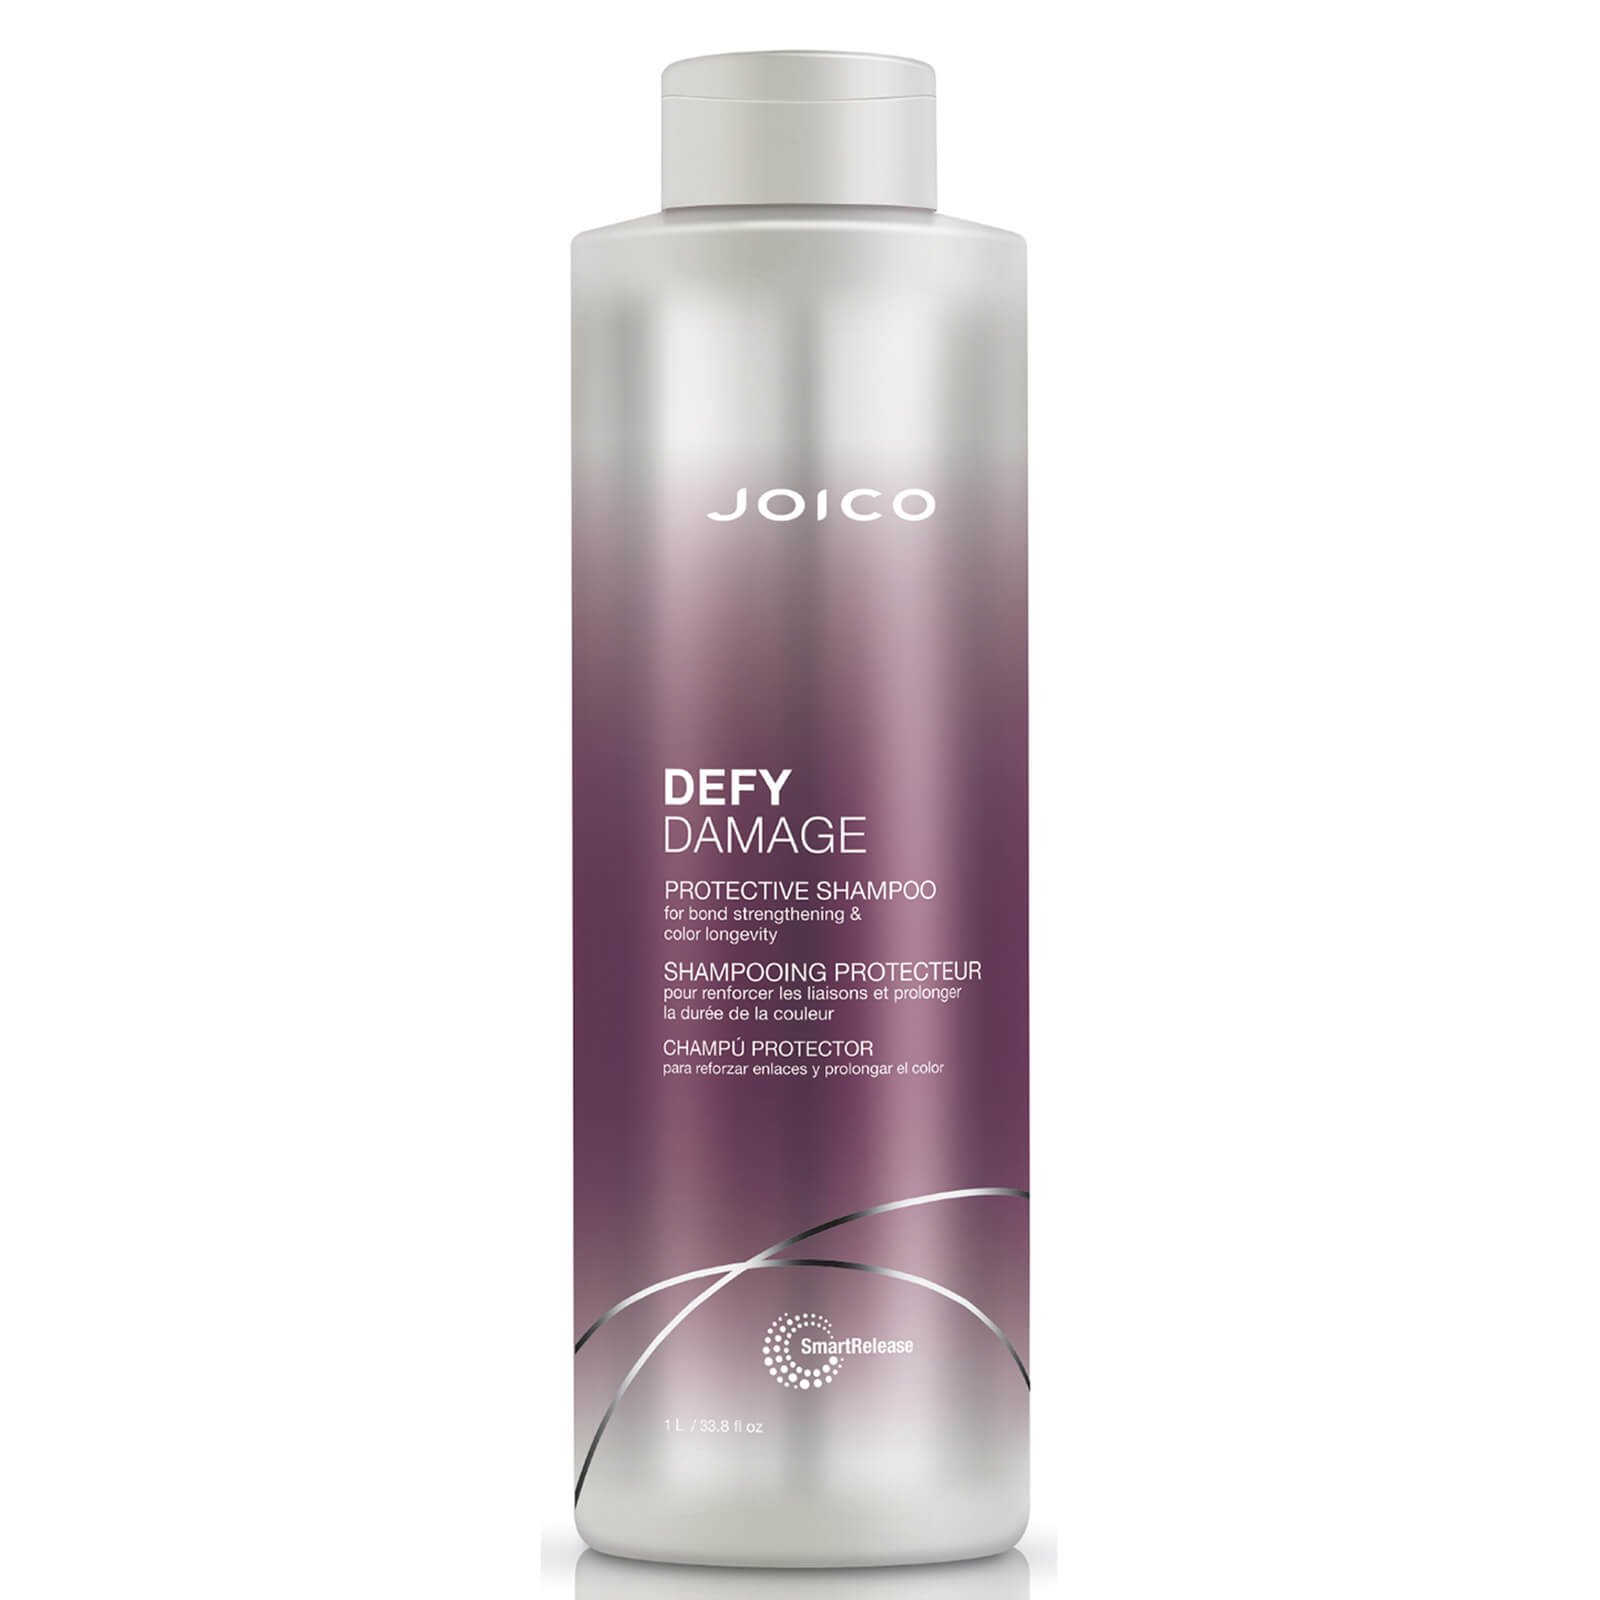 Joico - Defy Damage - Protective Shampoo - 1L - by Joico |ProCare Outlet|